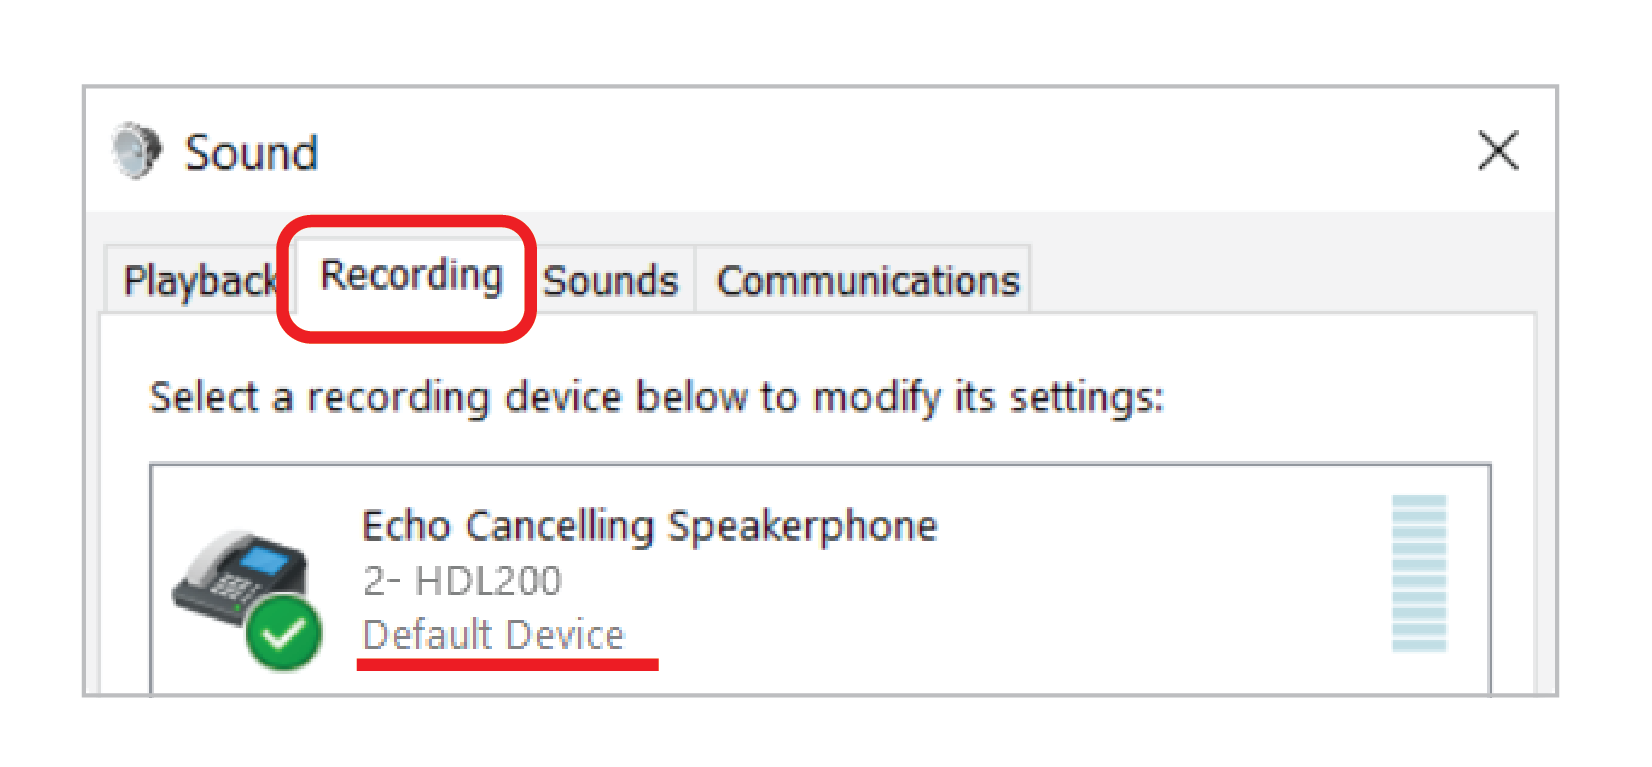 skype echo sound test playback too fast